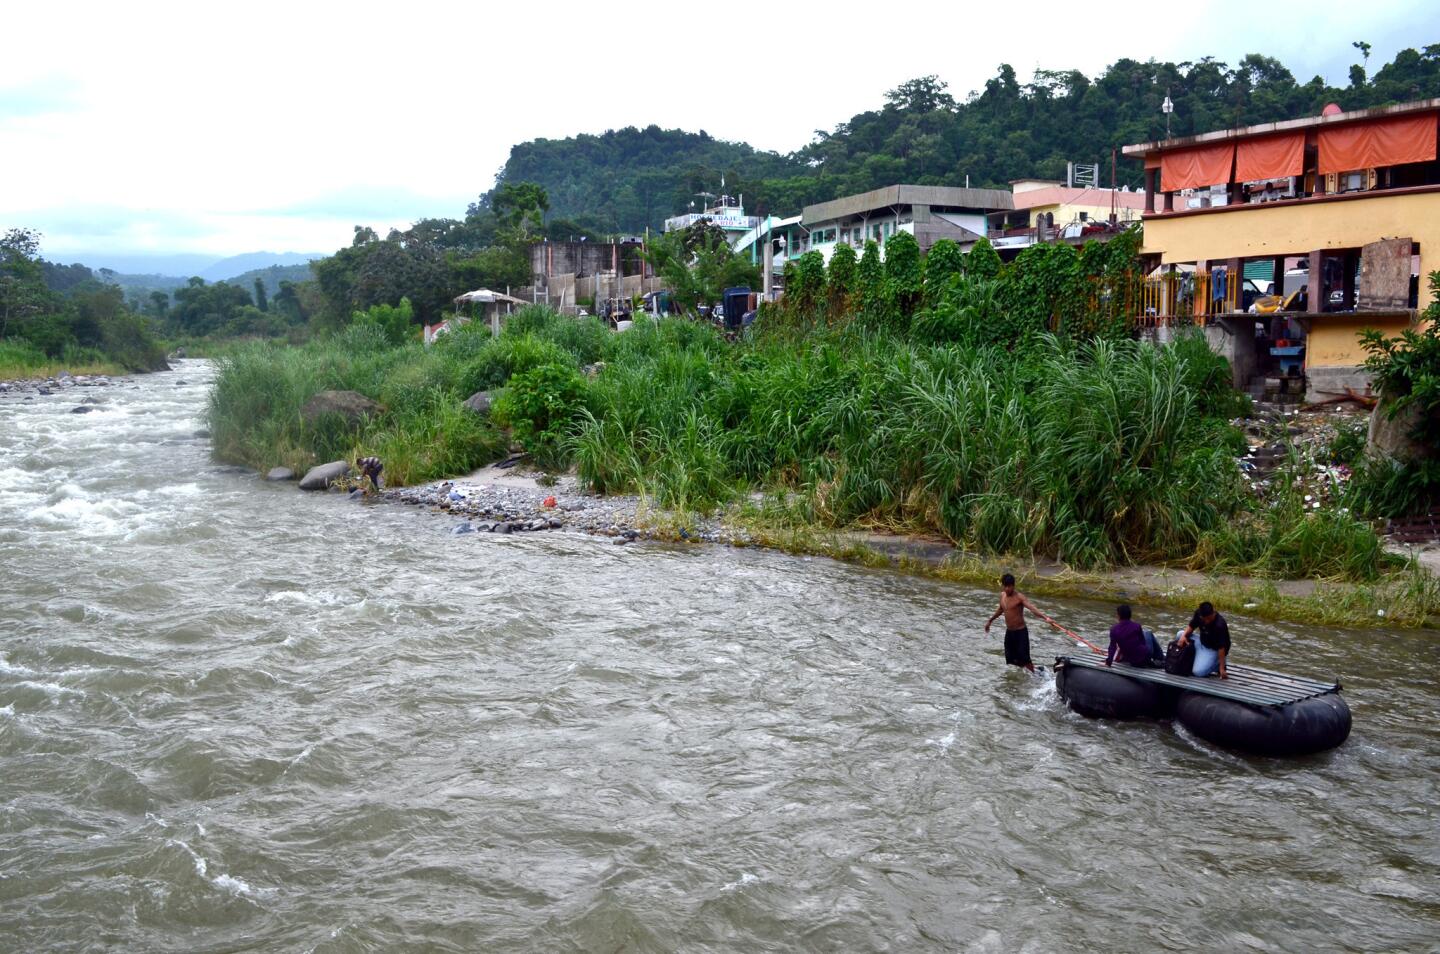 A boatman hauls an inner-tube raft and two men on the Suchiate River near Talisman, Mexico. The riverbank with the buildings is the Guatemalan side; the official border crossing is on a bridge just a few yards away.